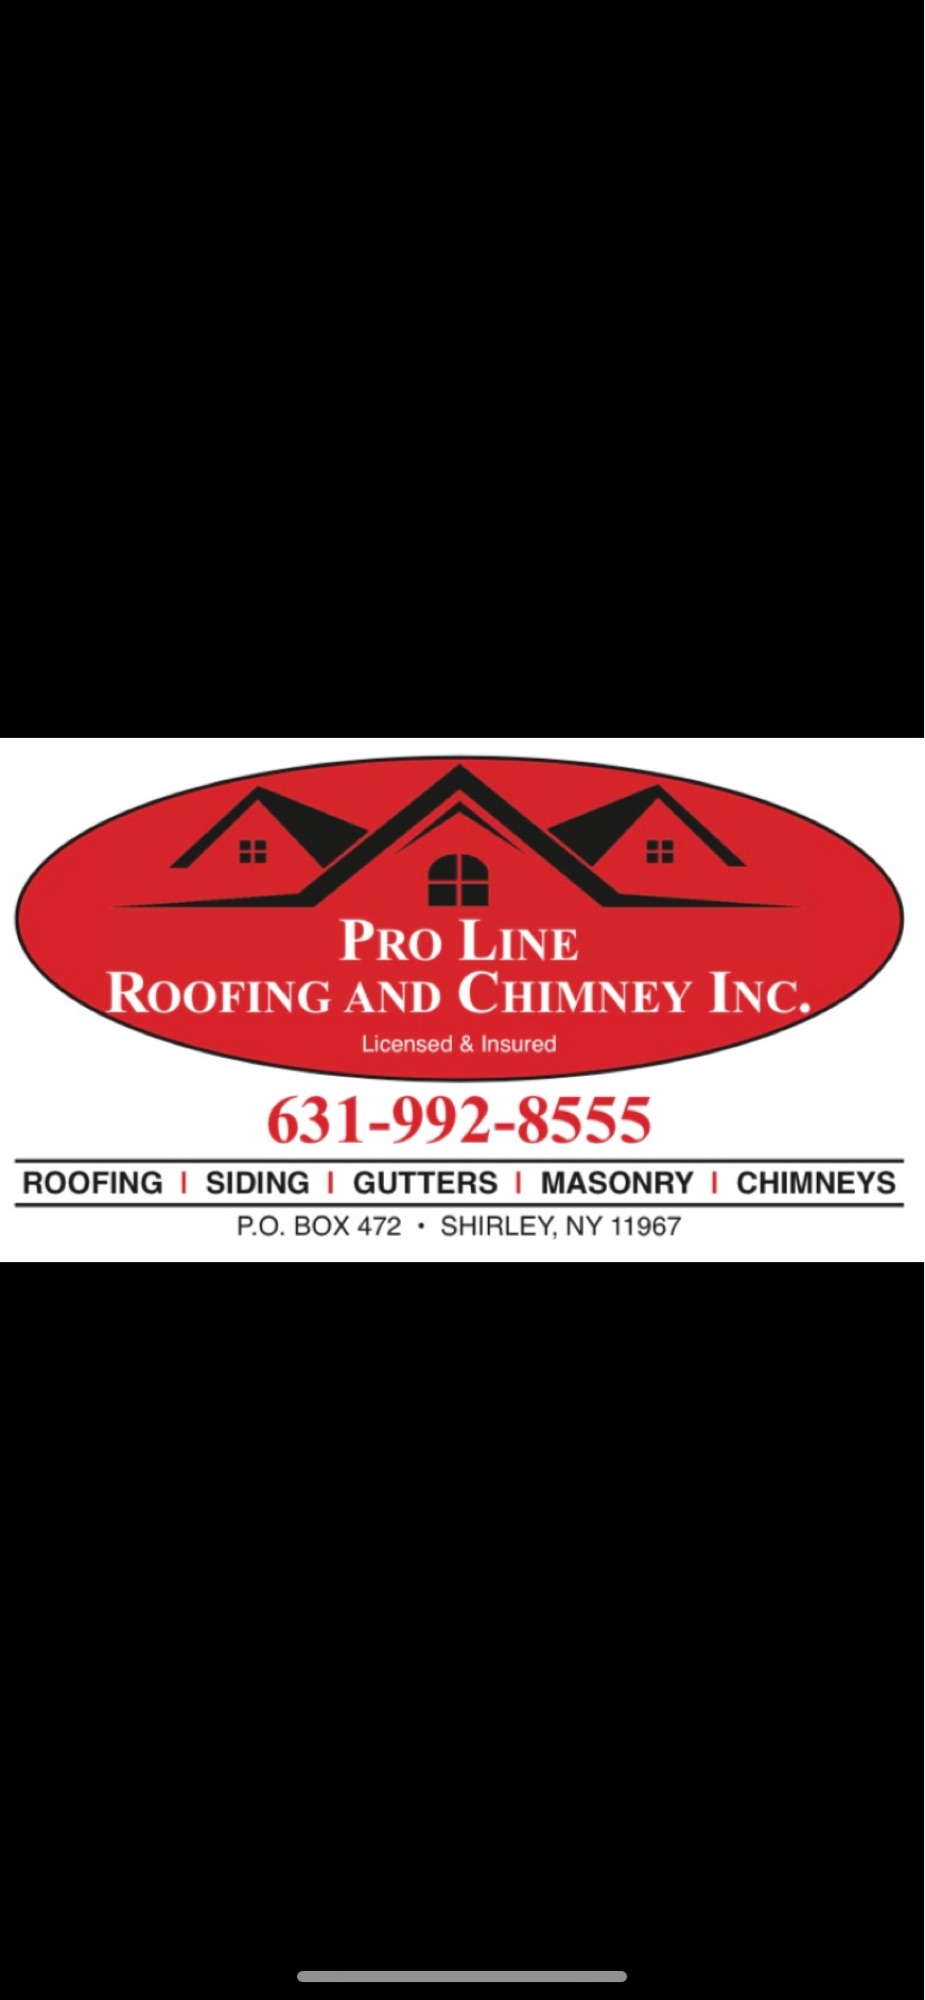 Pro Line Roofing And Chimney, Inc. Logo